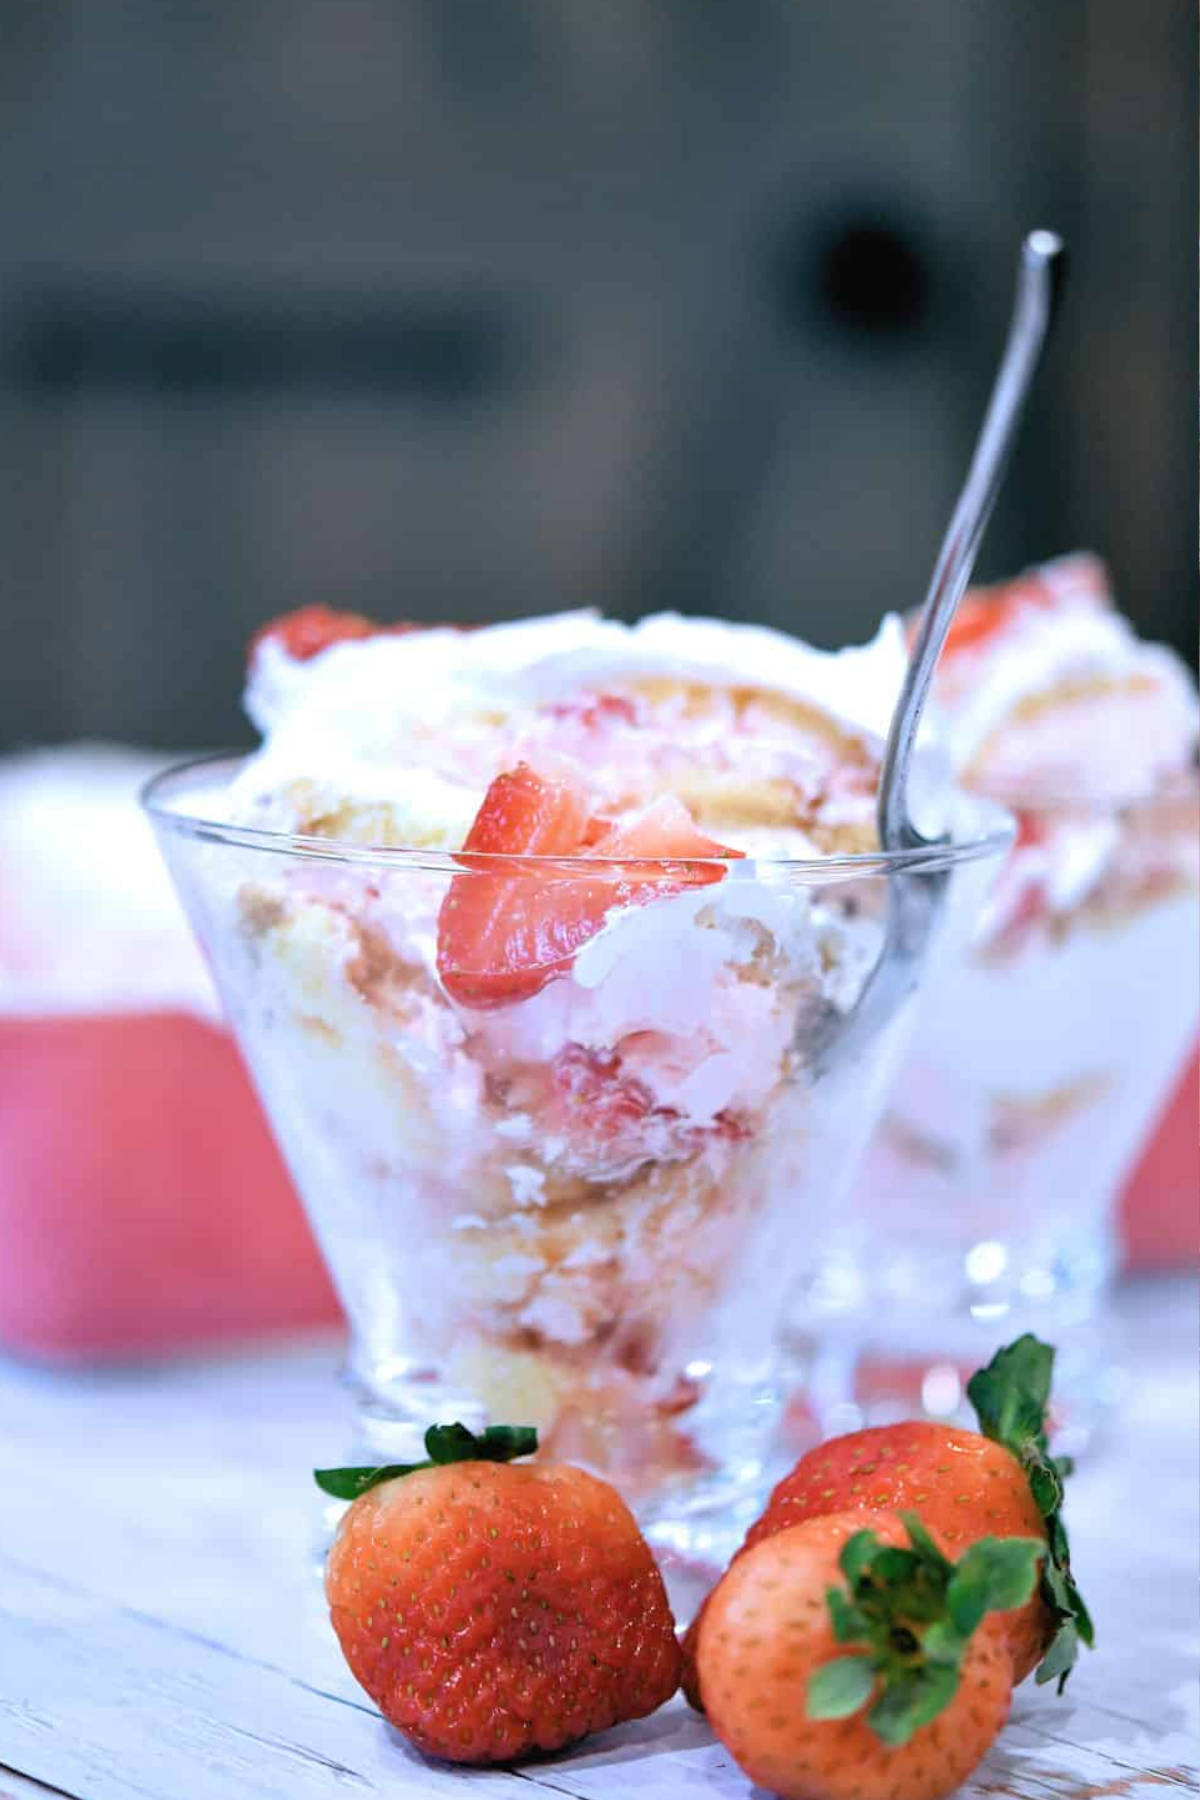 Close up image of a strawberry tiramisu in a glass with a spoon.